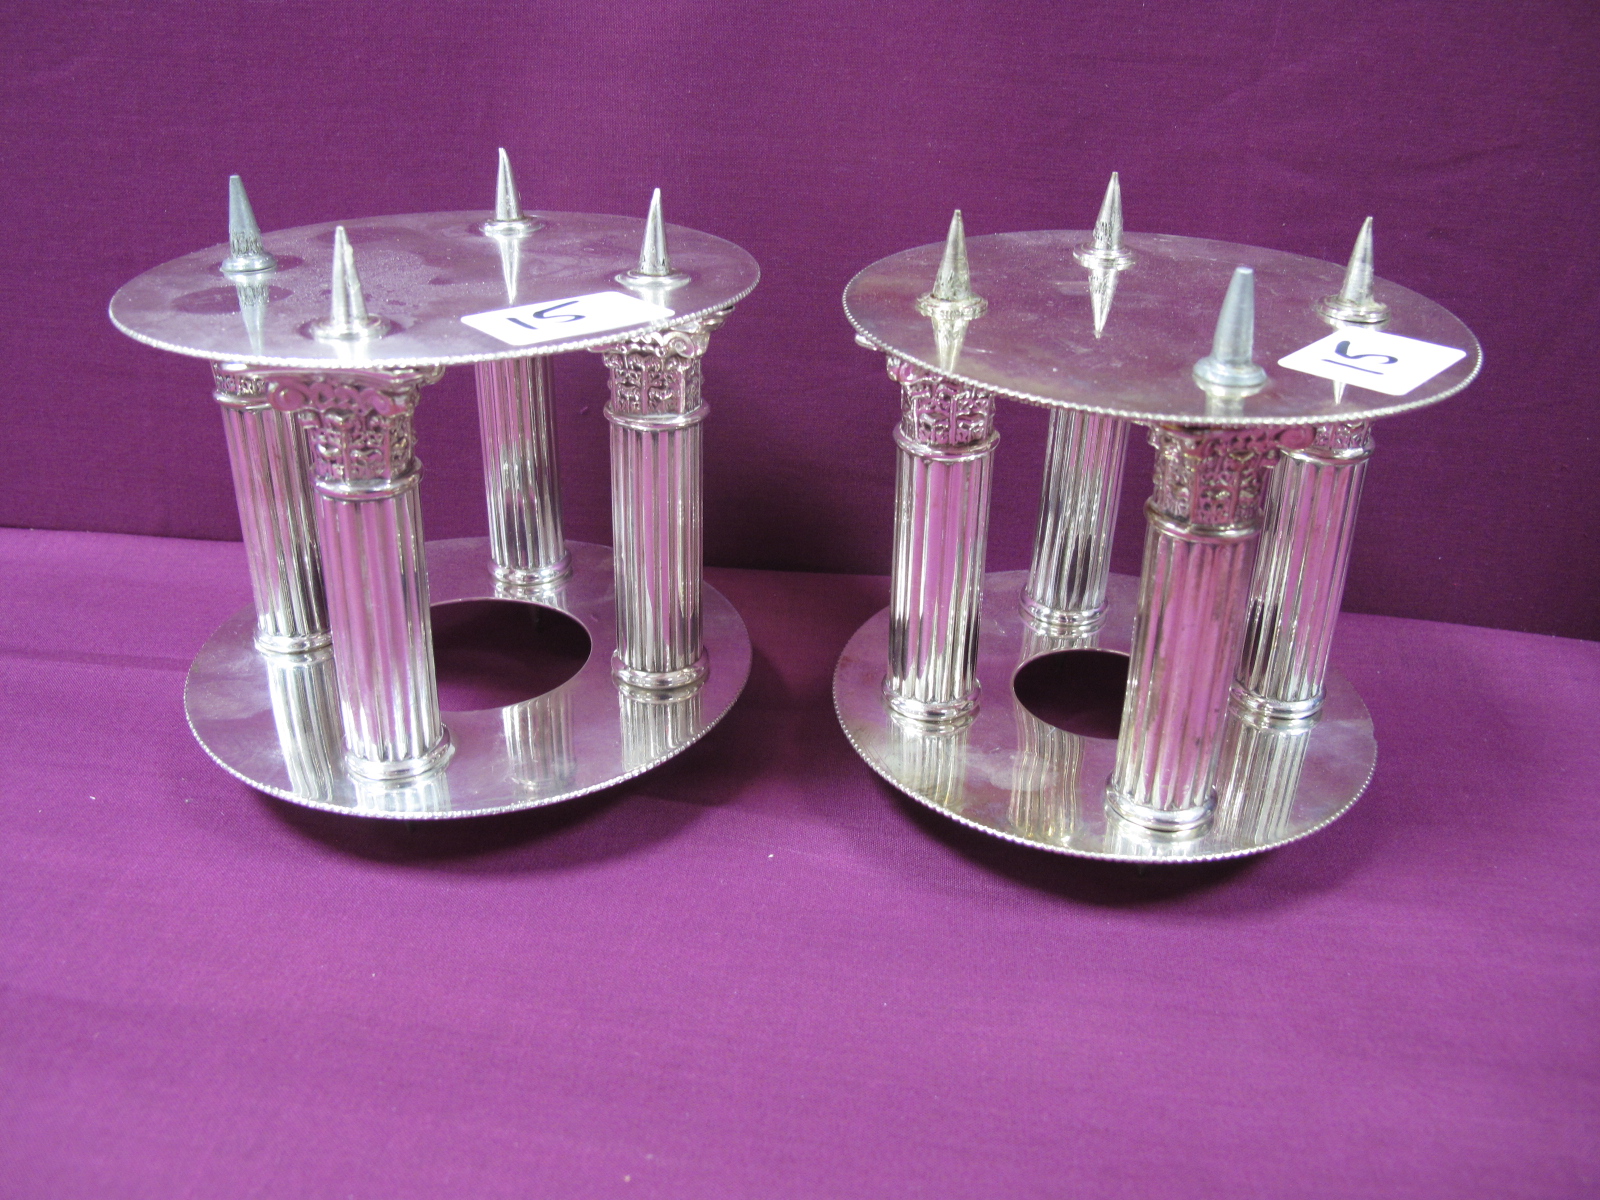 A Late XIX / Early XX Century Plated Wedding Cake Stand, with mirrored plateau, within a ribbon tied - Image 6 of 7